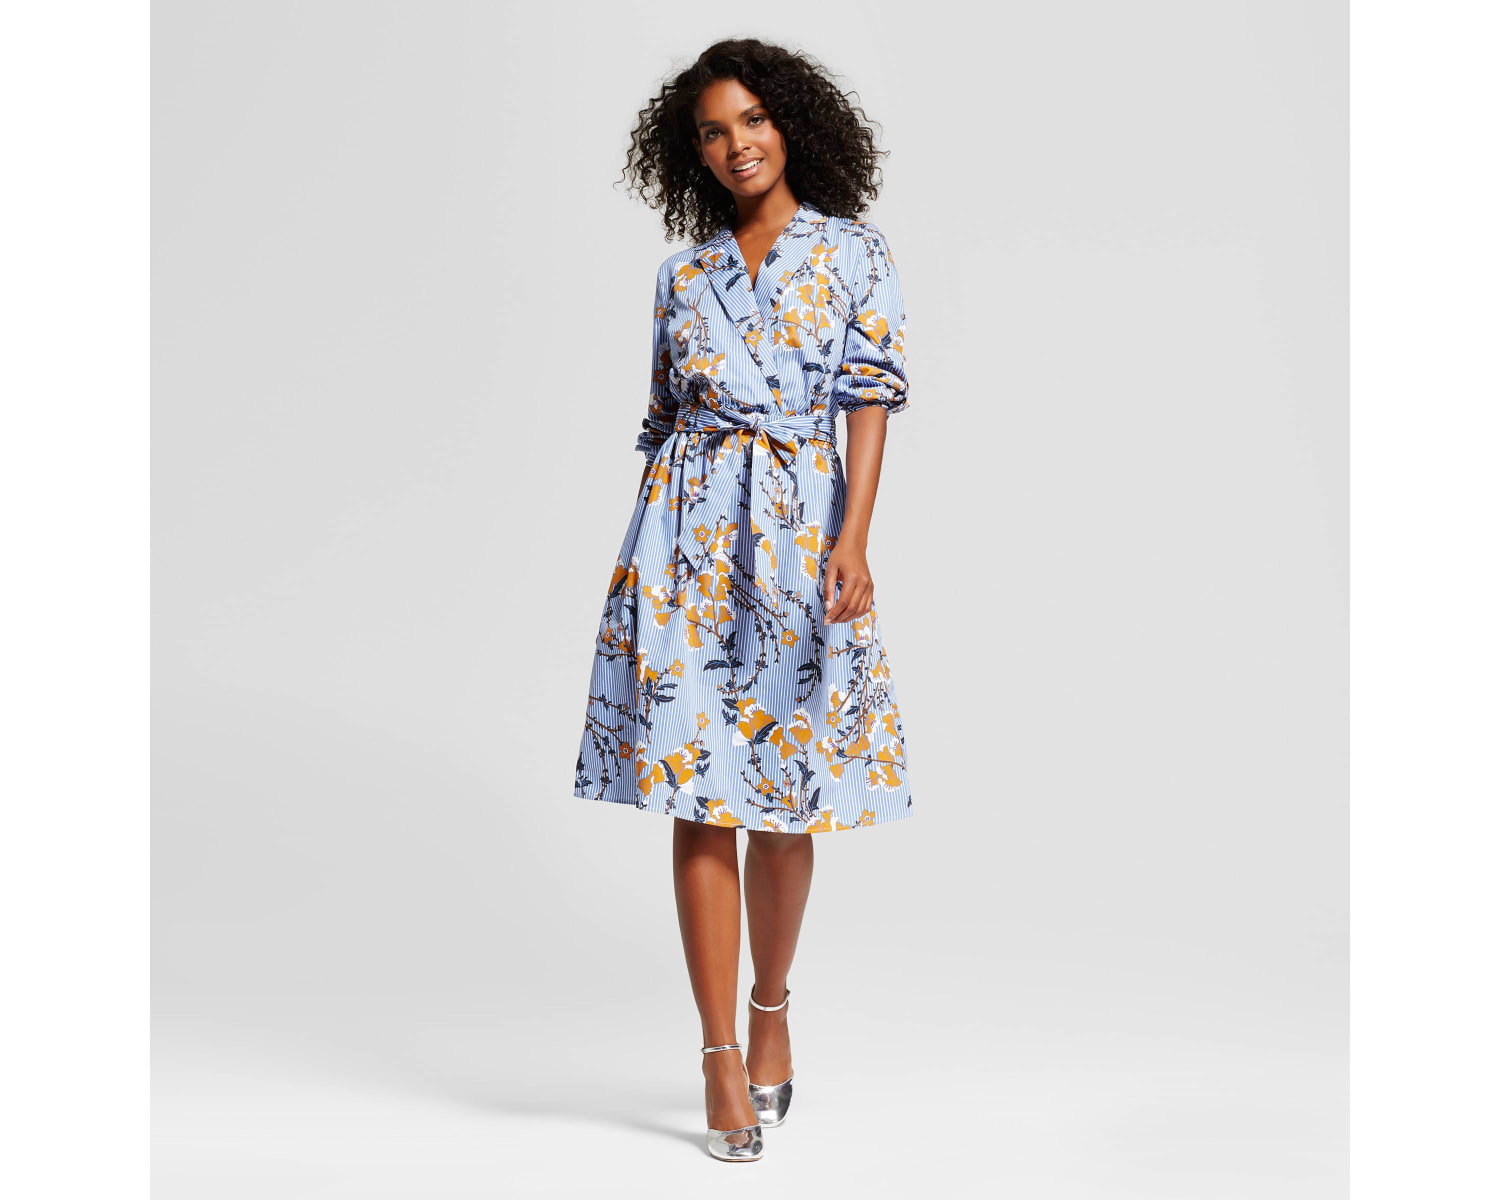 The best items from Target's new fall fashion collection